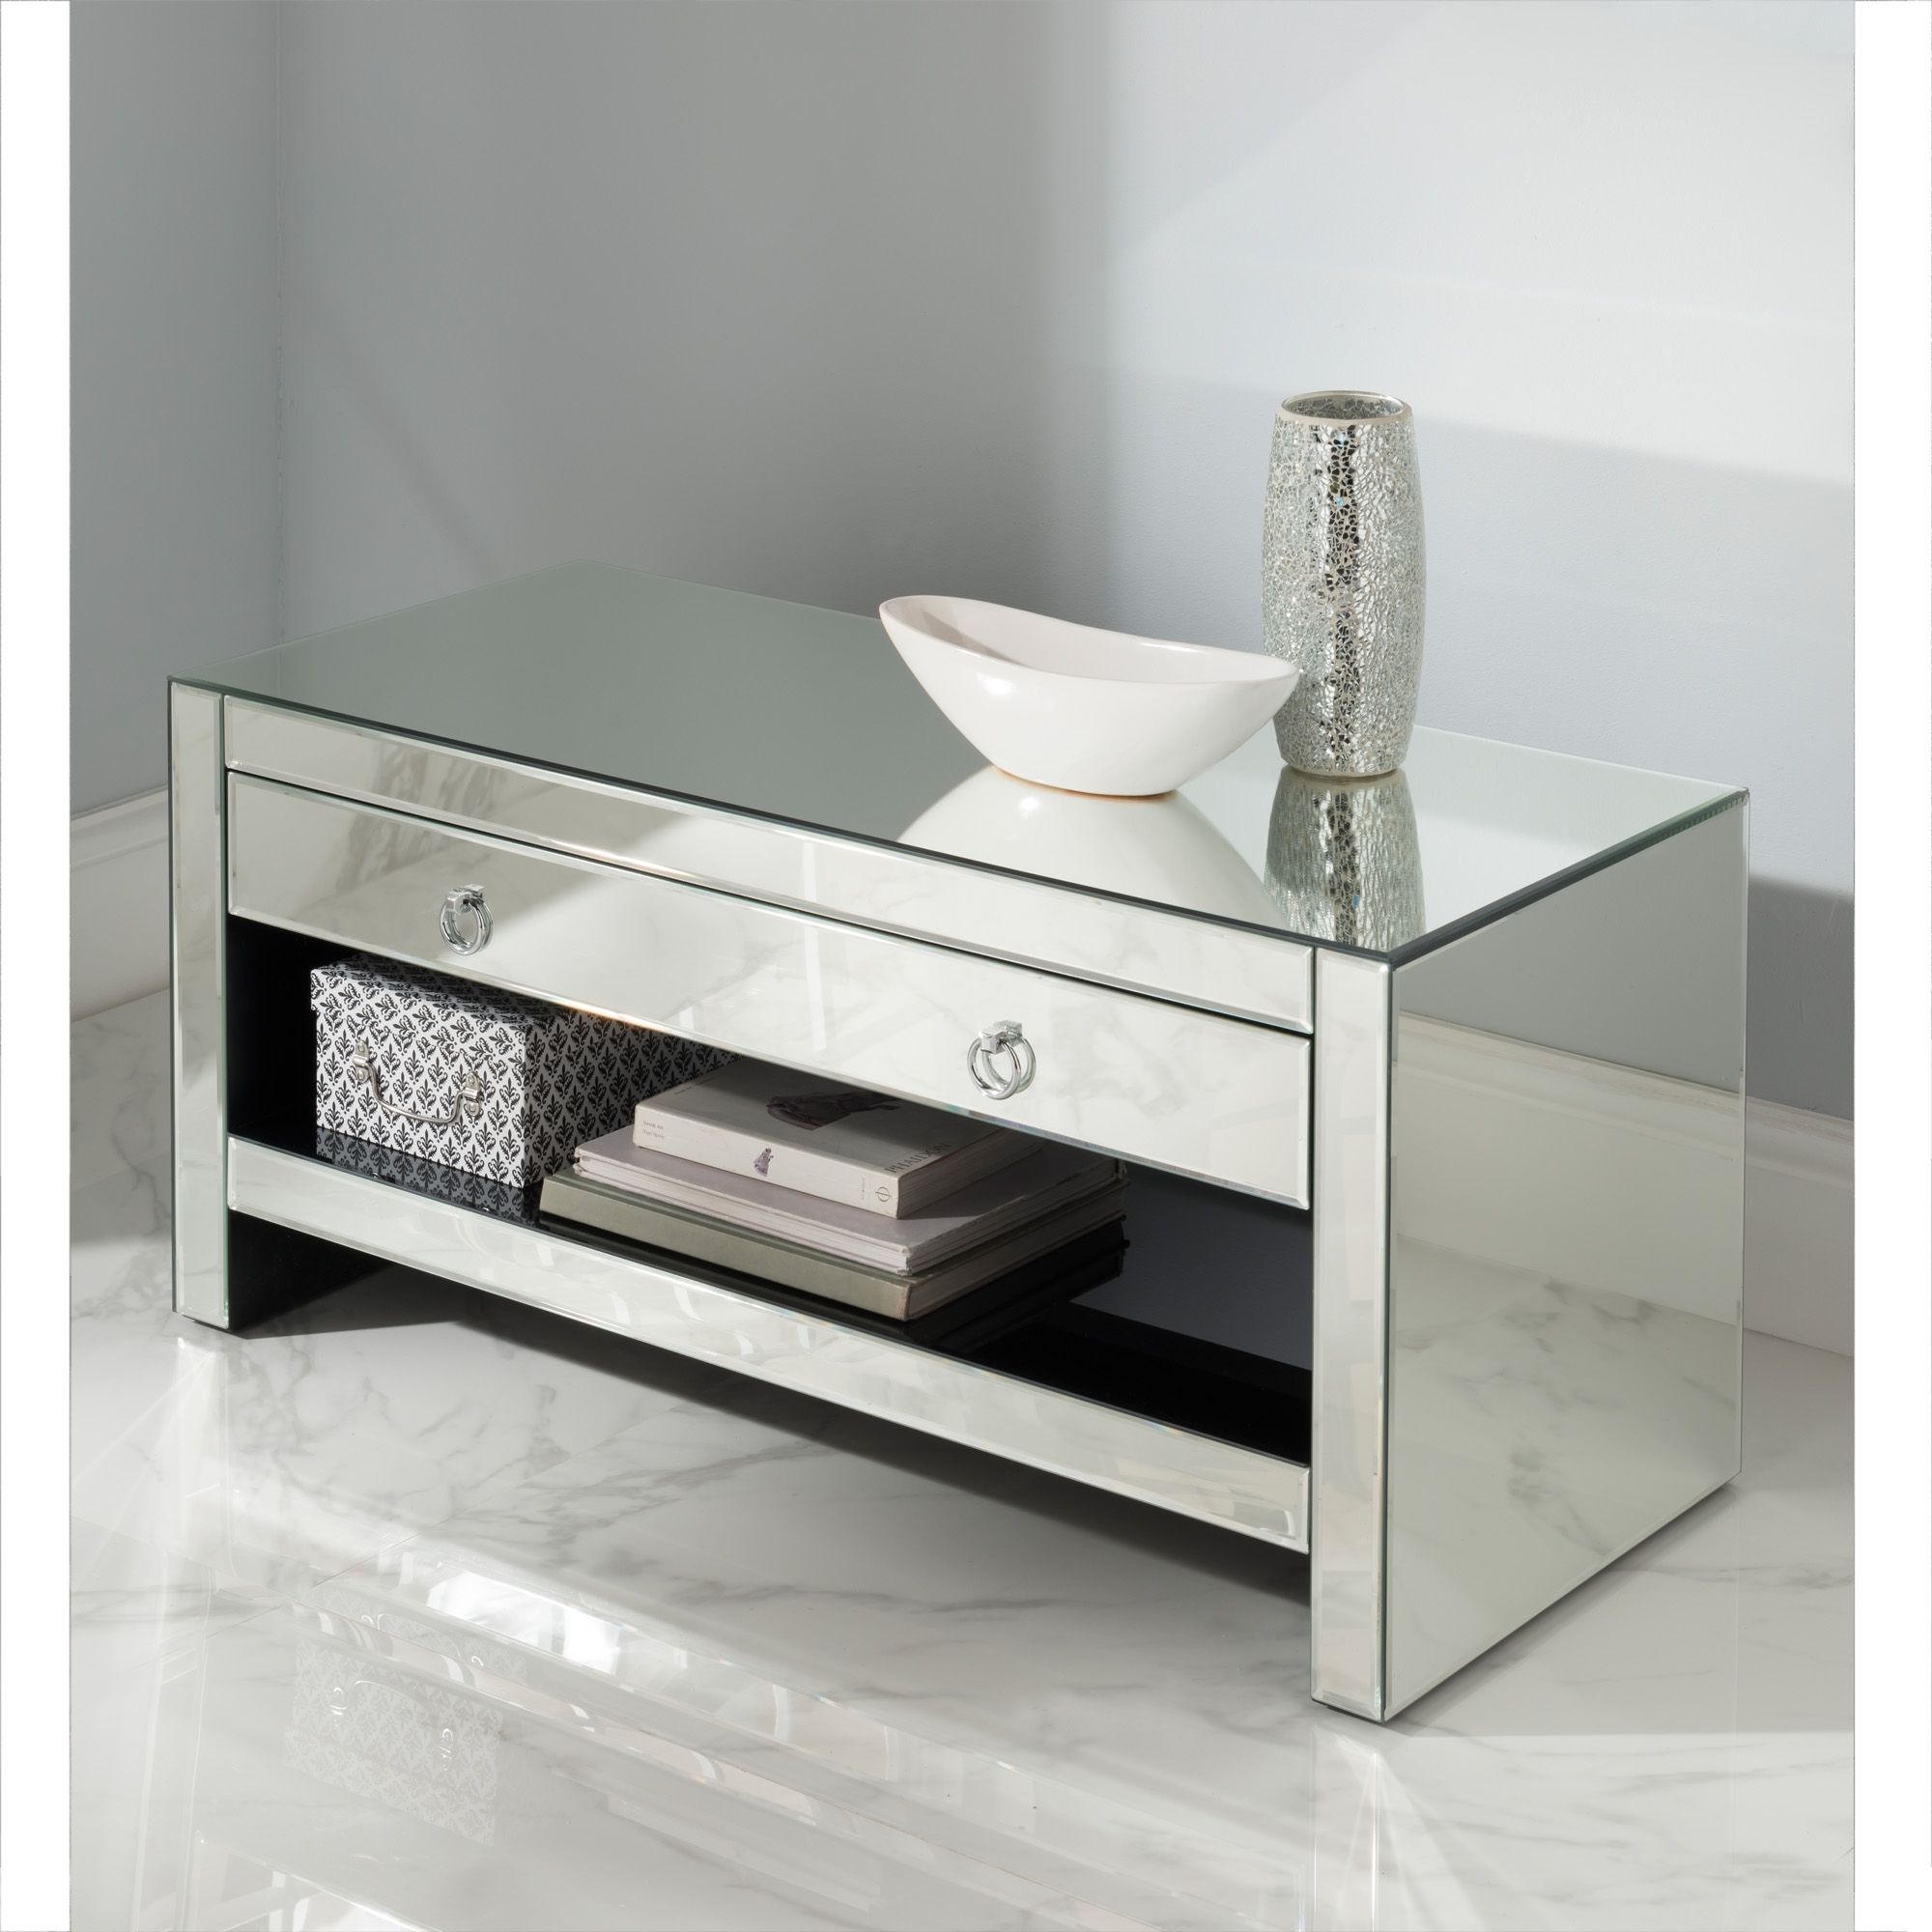 Mirrored Tv Cabinet | Glass Venetian Furniture Intended For Fitzgerald Mirrored Tv Stands (Gallery 4 of 20)